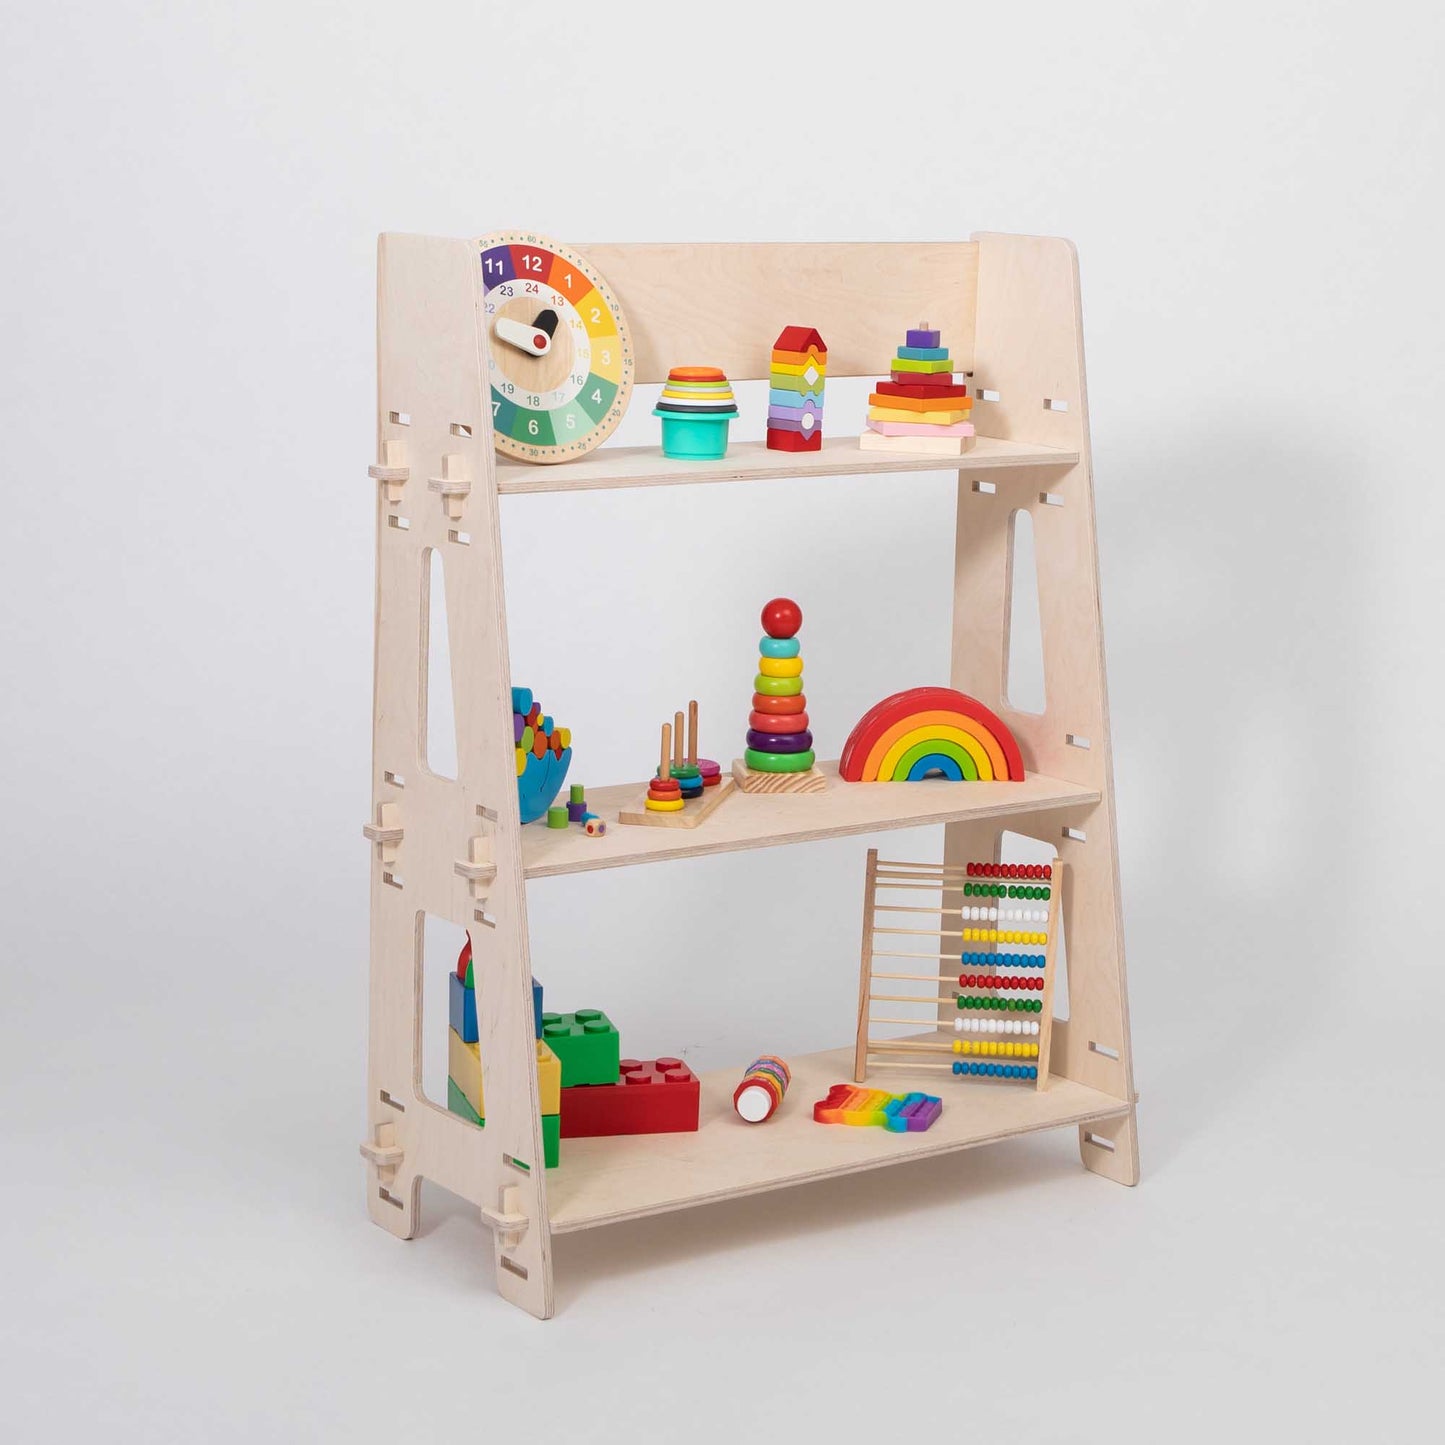 A wooden Montessori toy shelf organized with various colorful educational toys, including blocks, rings, and a clock, ideal for a children's bedroom.